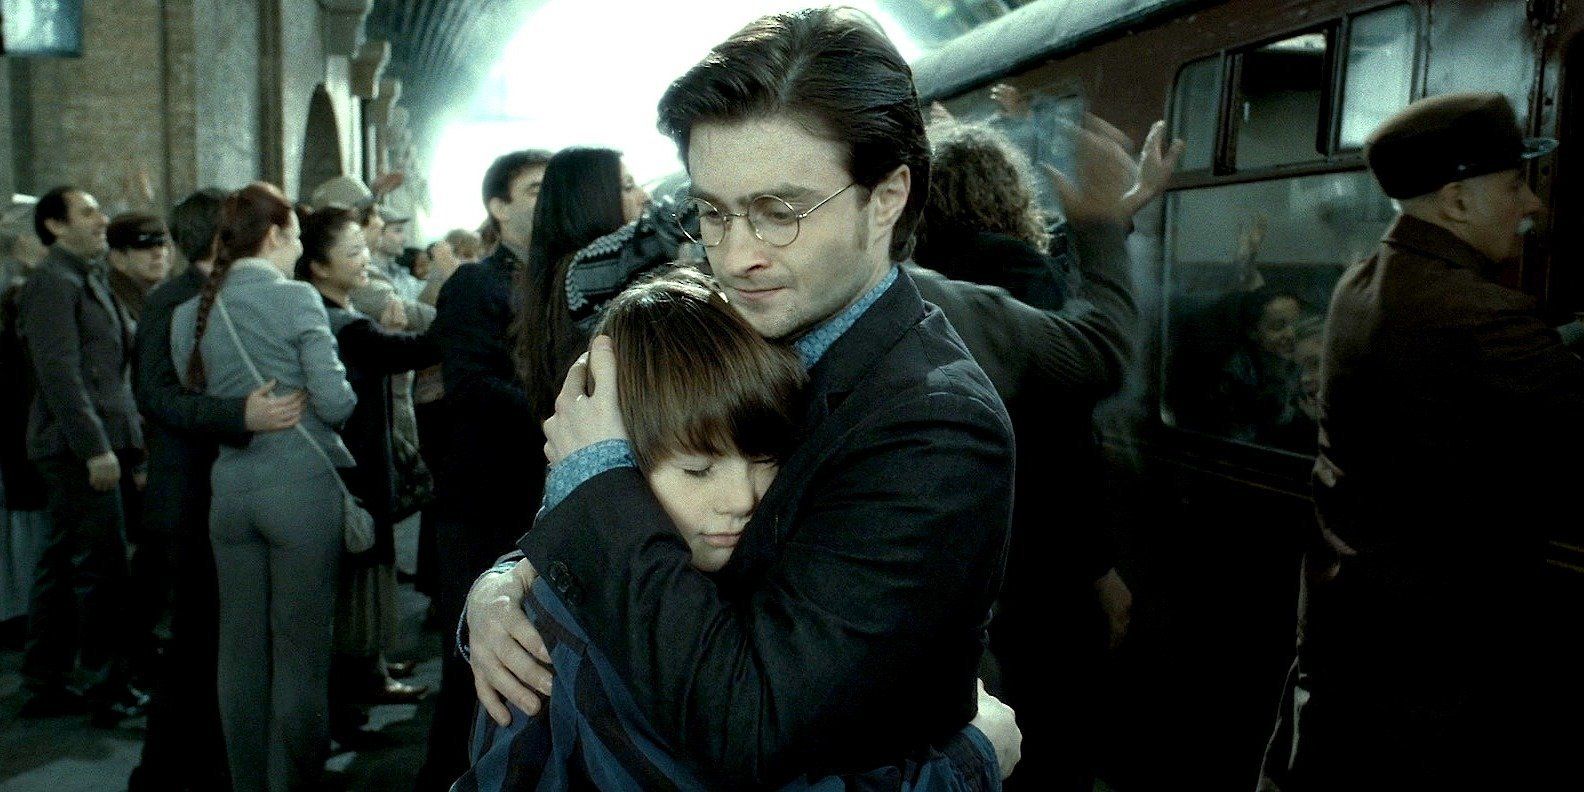 Harry Potter 5 Ways Snapes Ending Is Fitting (& 5 Why It Makes No Sense)